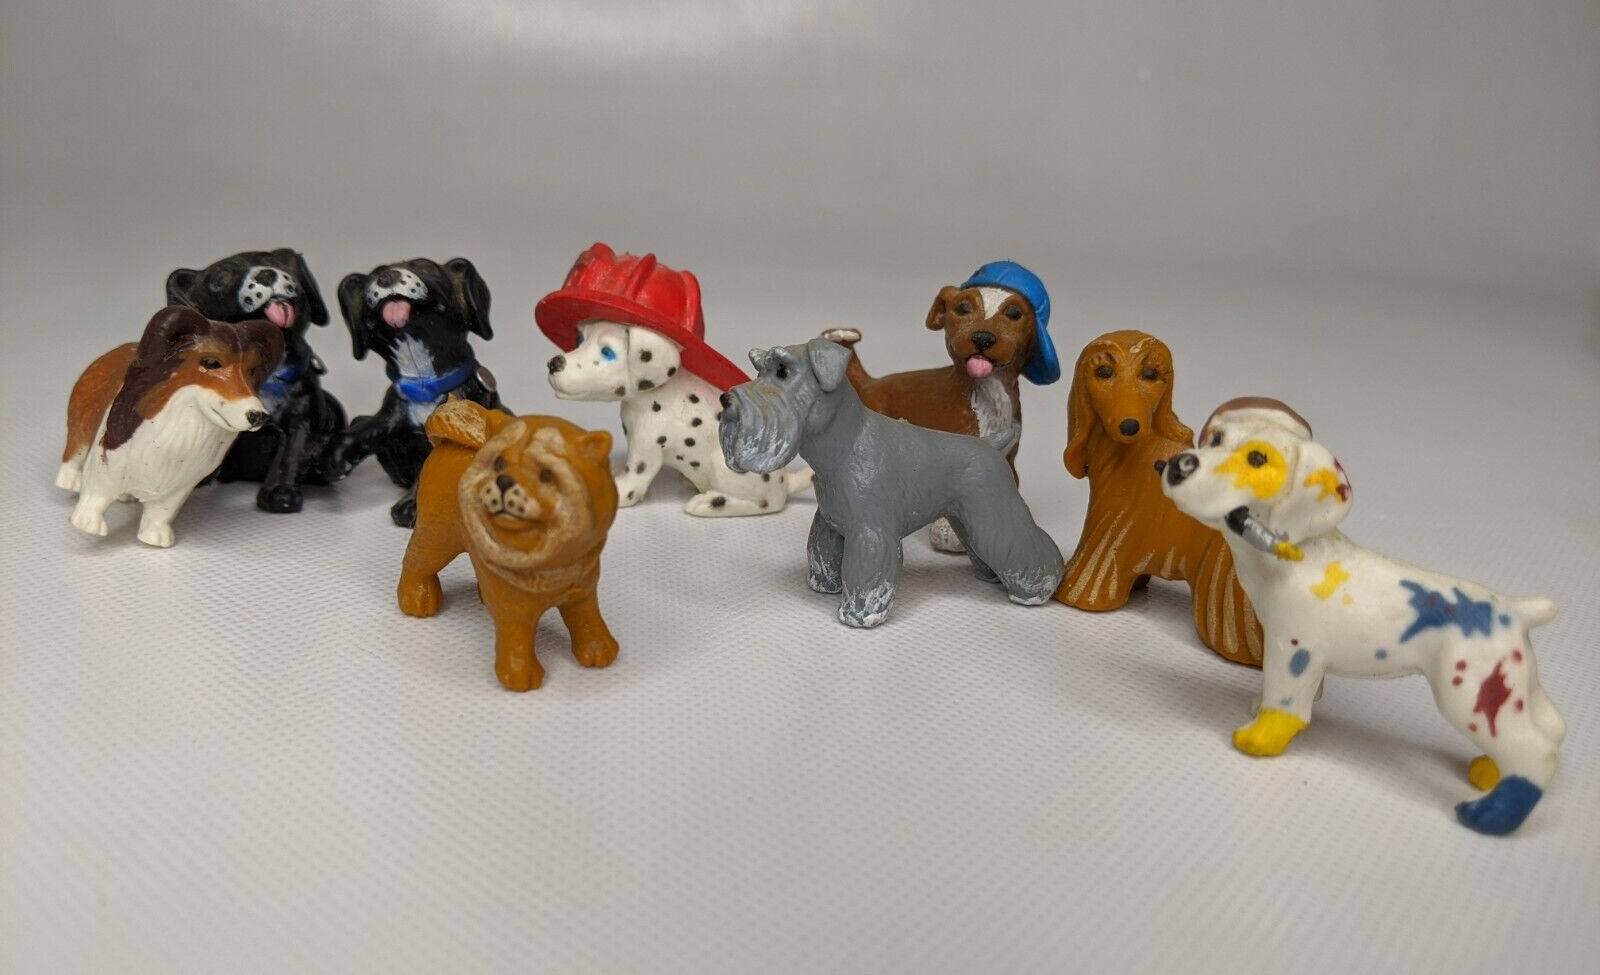 LOT of 9 Topps 1997 Toy Dogs Schnauzer, Collie, Chow Chow, Dalmatian.. 1.5” Tall